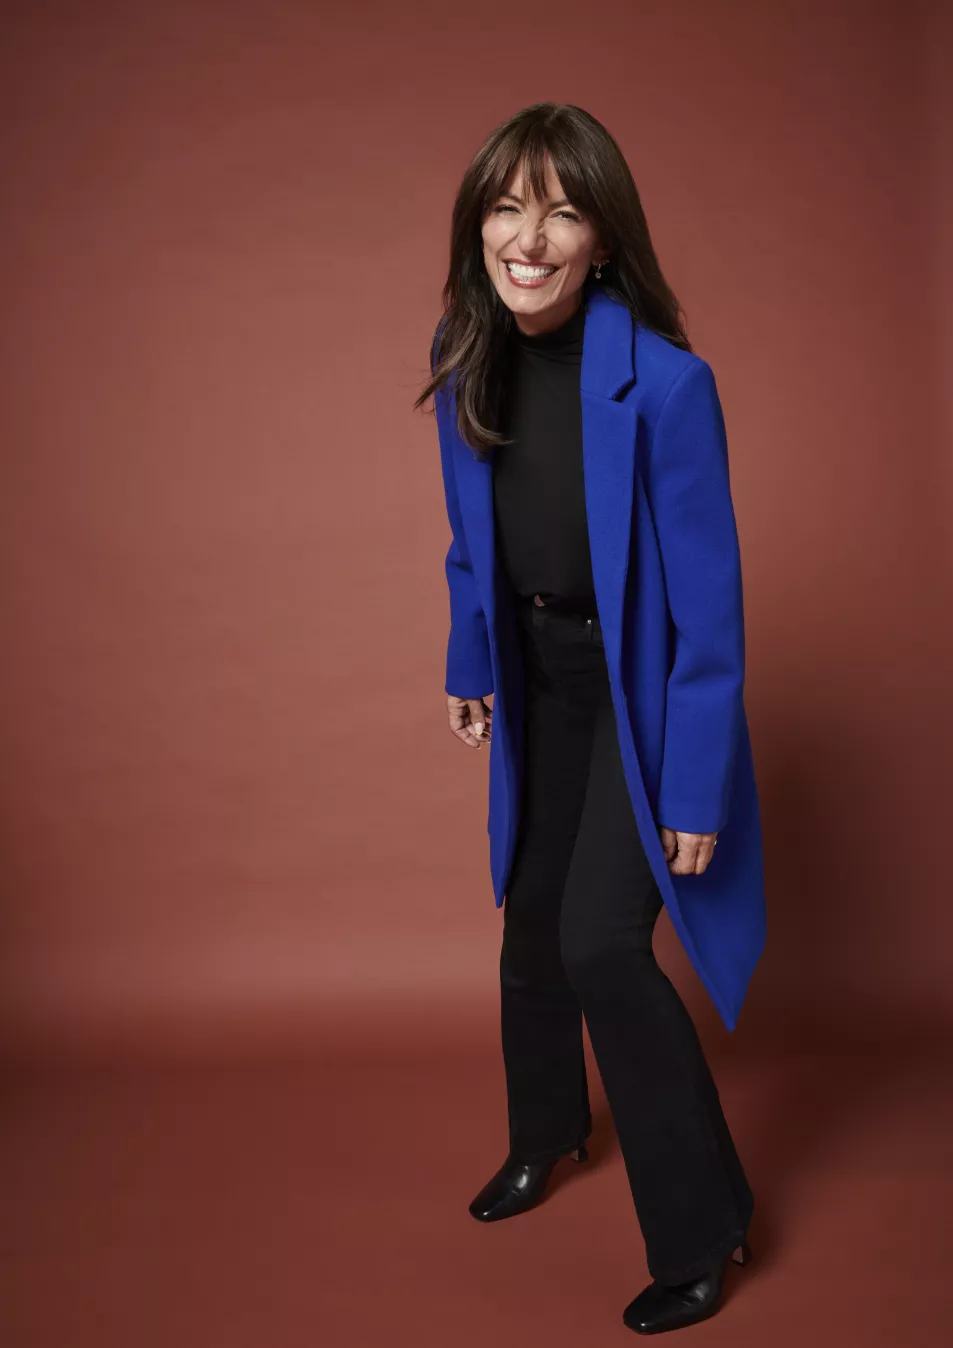 Davina McCall wearing Sosandar Coat, £125; Black High Neck Embellished Long Sleeve Top, £24; Square Toe Leather Boot, £70, available from JD Williams